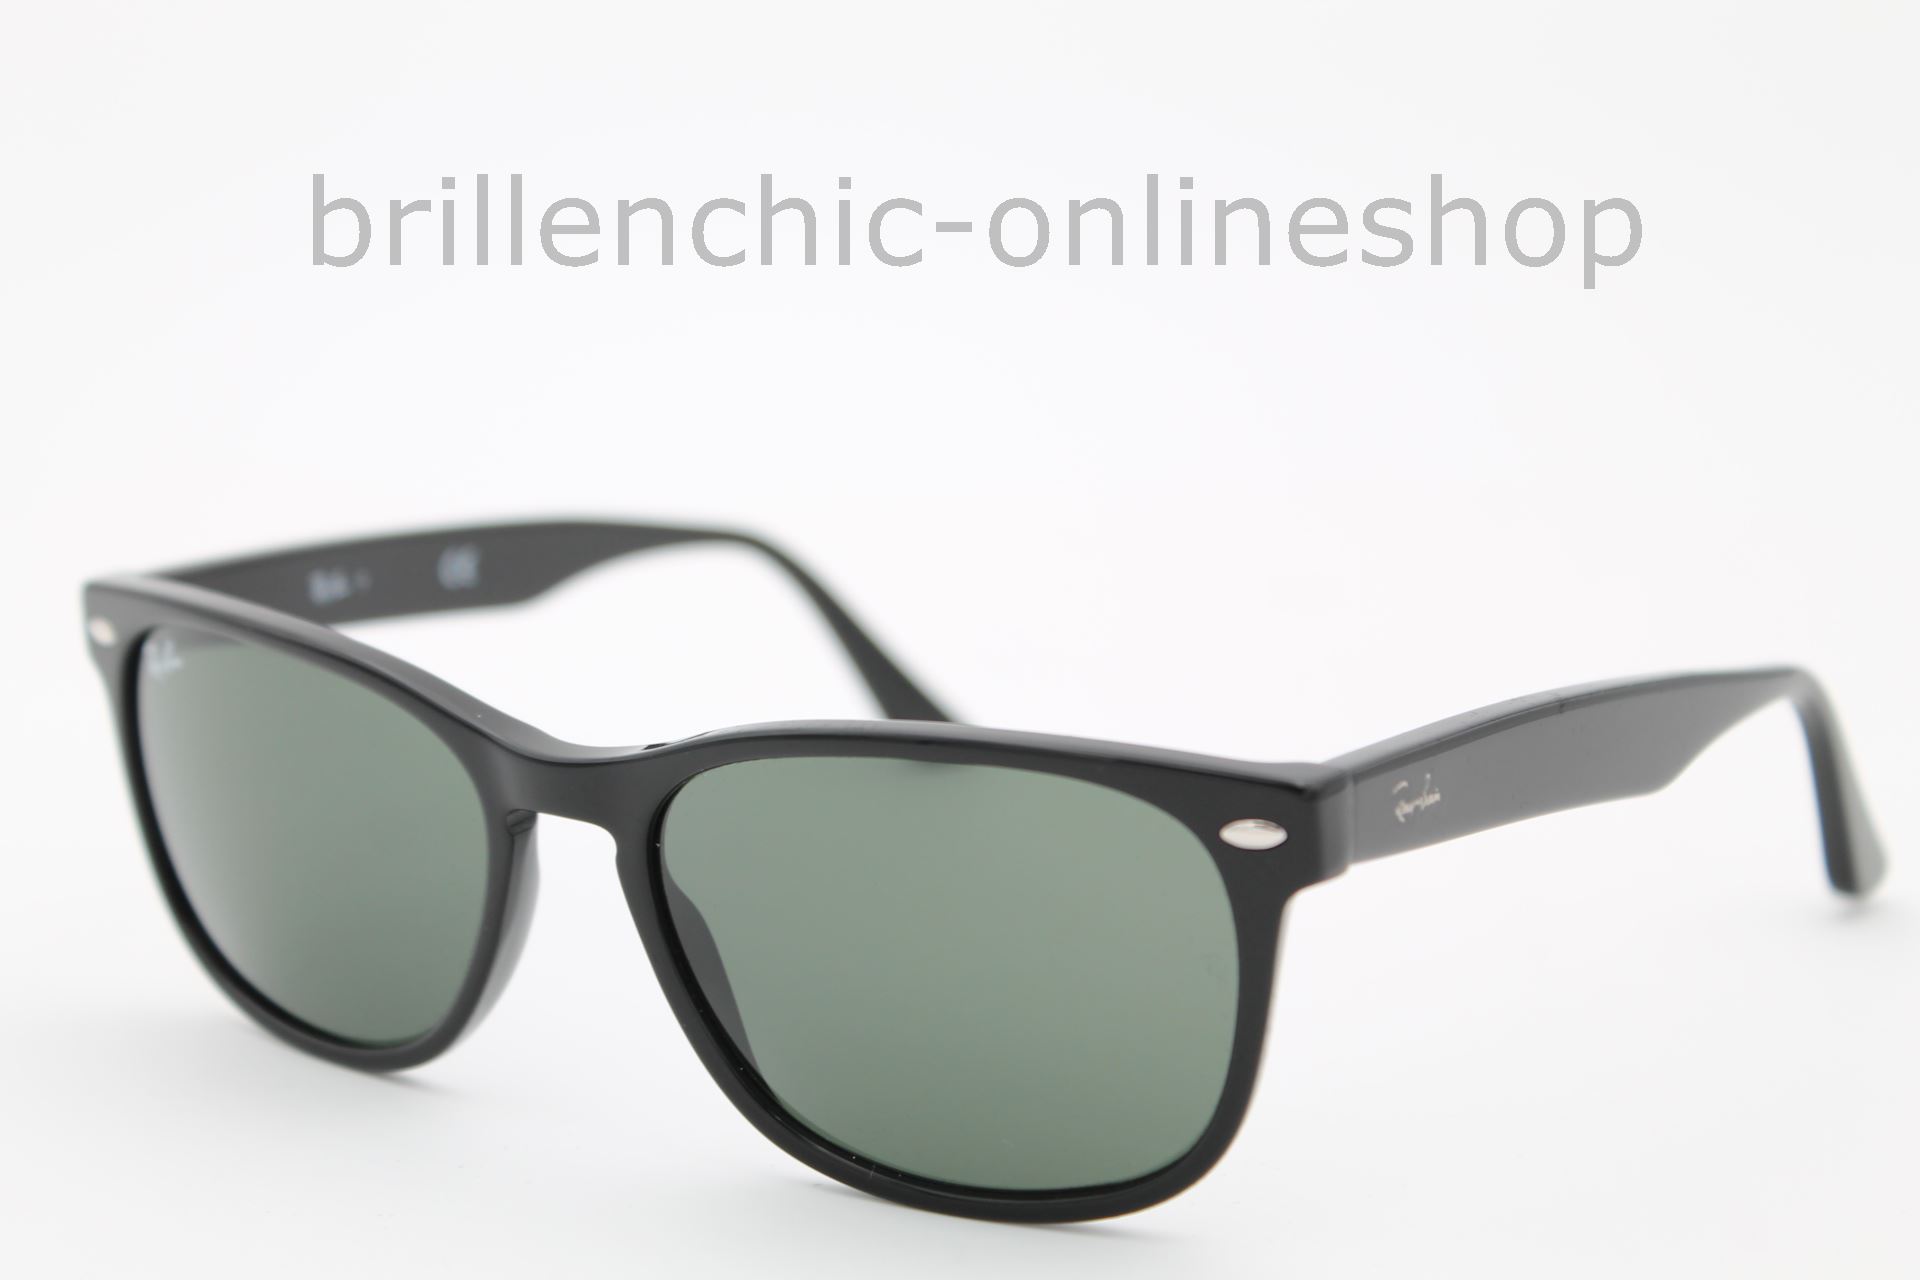 Brillenchic-onlineshop in Berlin - Ray Ban RB 2184 901/31 